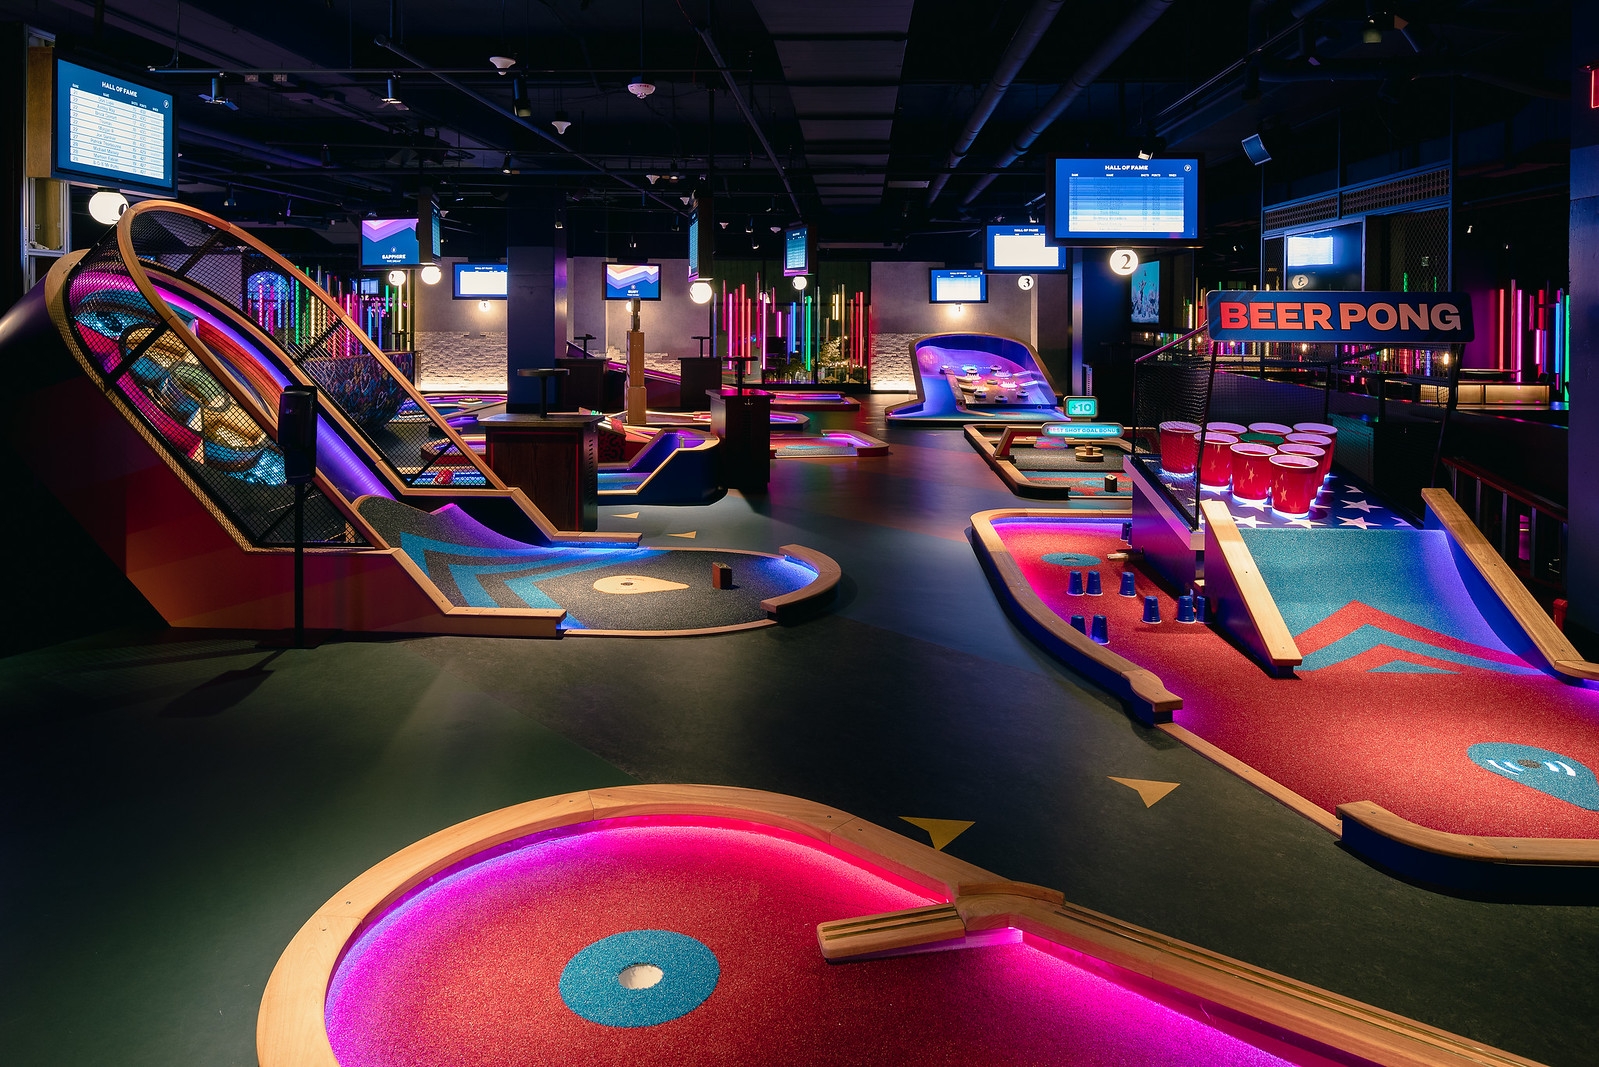 Luxury indoor mini golf is coming to the Seaport - The Boston Globe